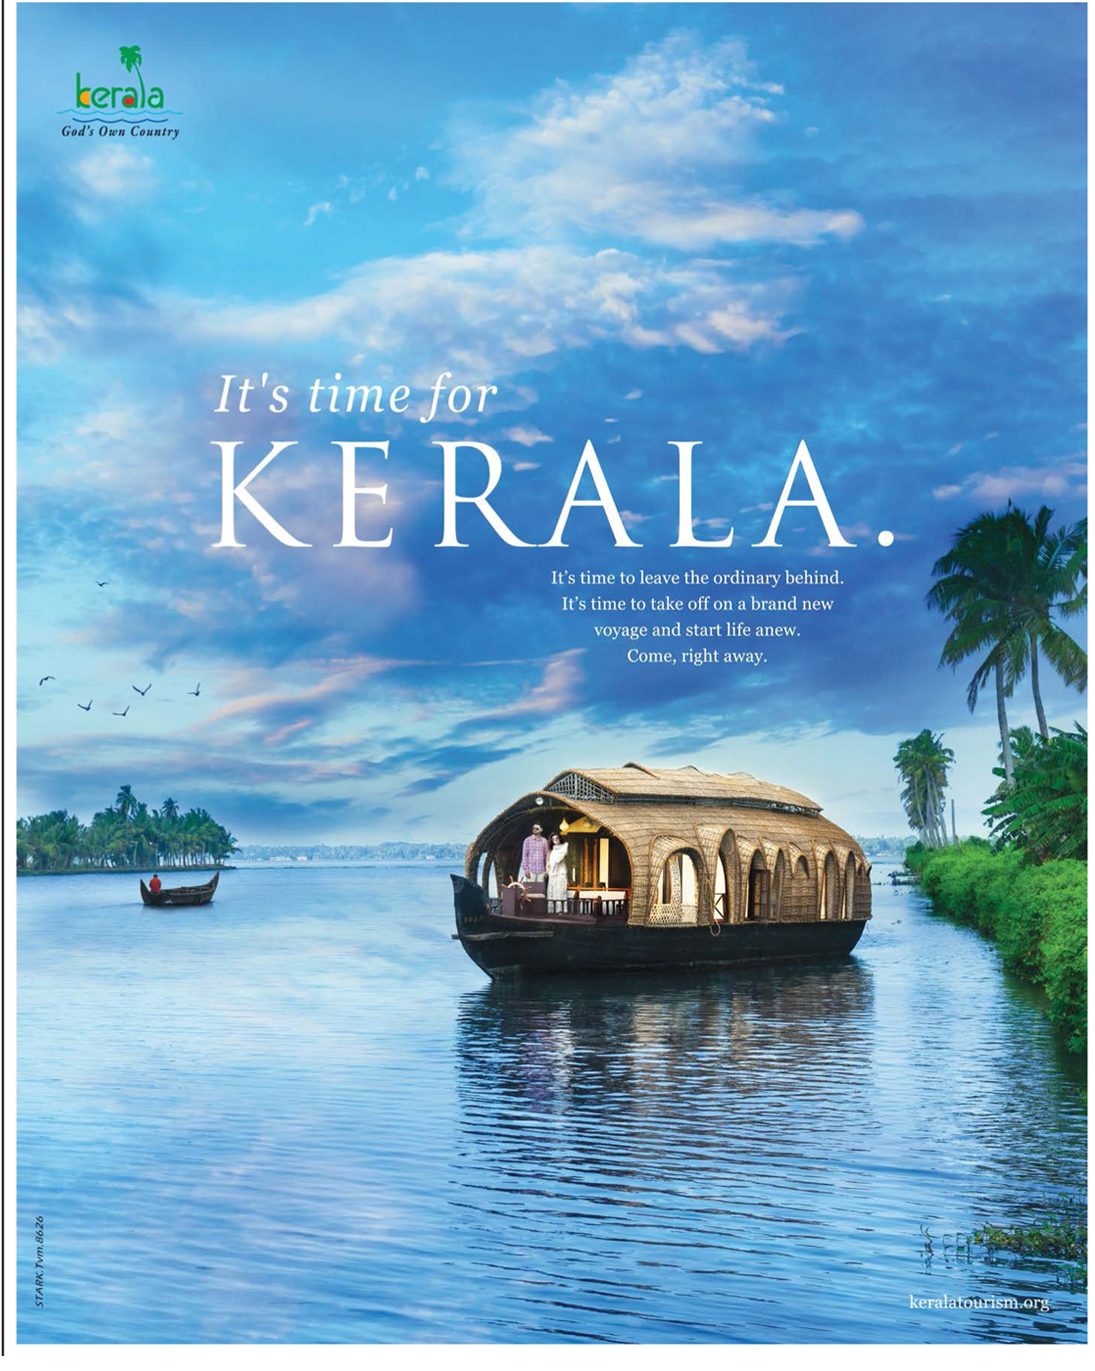 kerala tourism ad god's own country